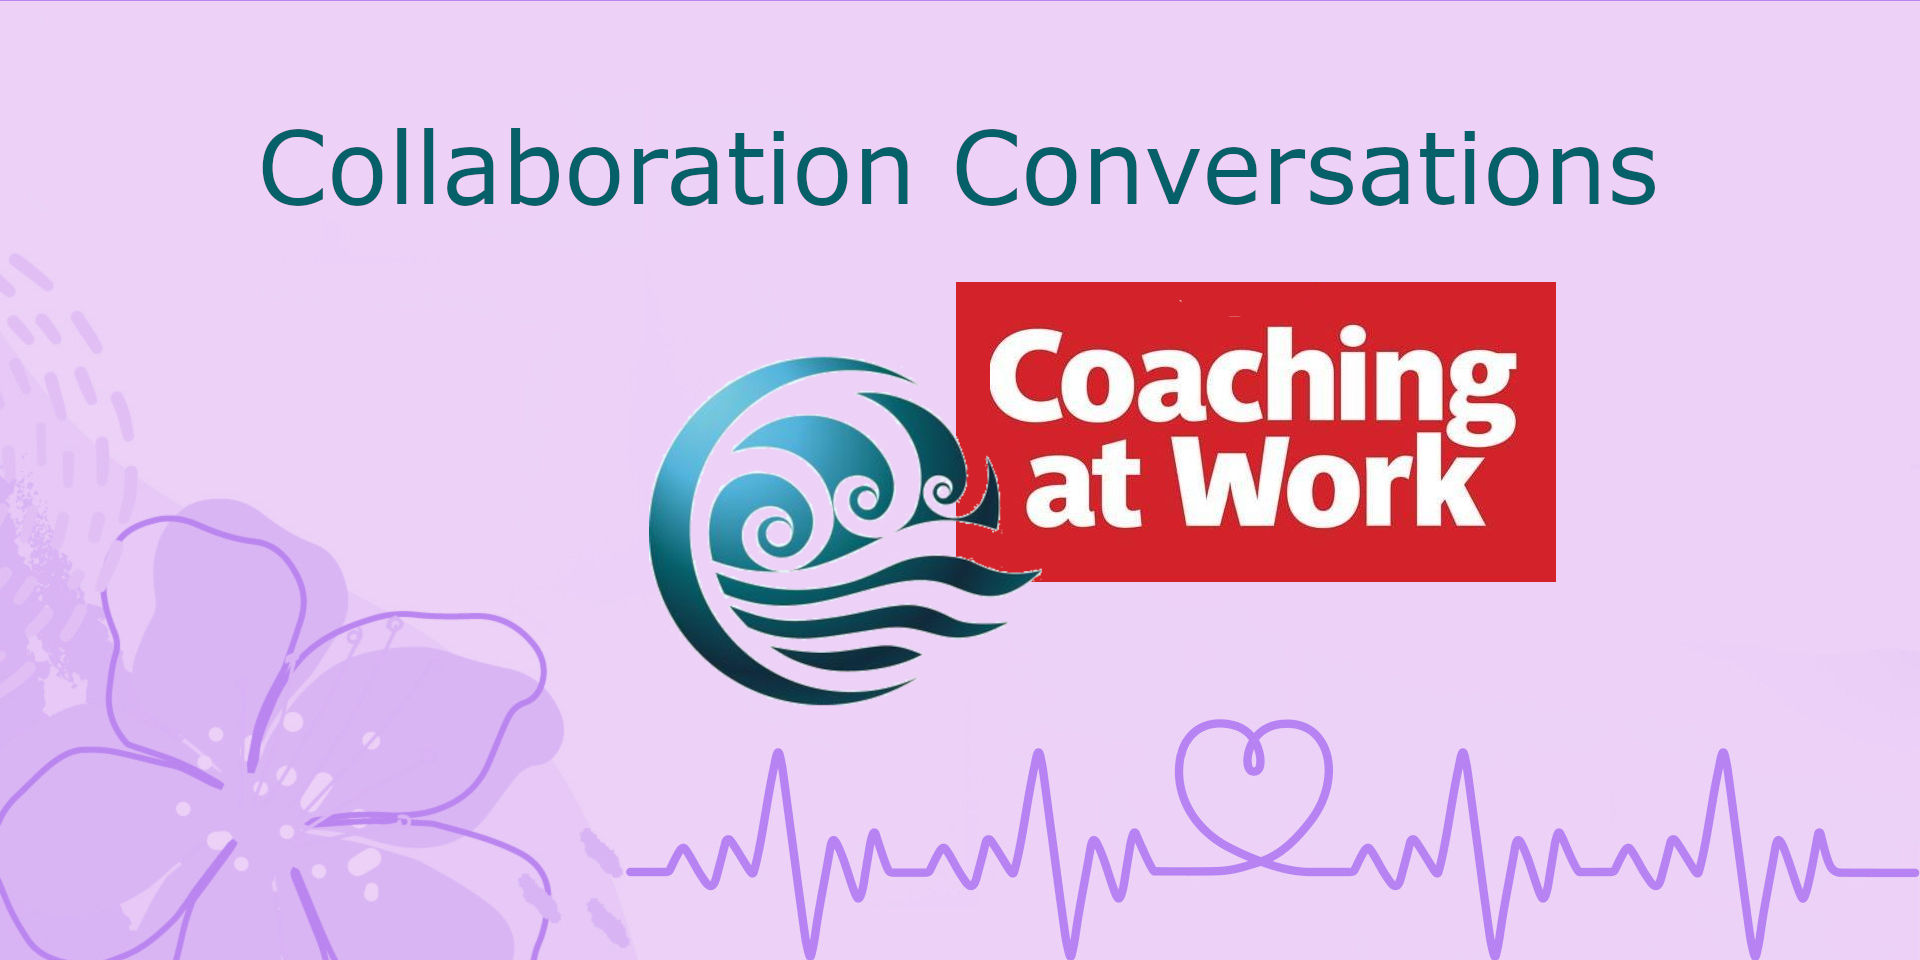 CCA and CAW: Coaching & Collaboration